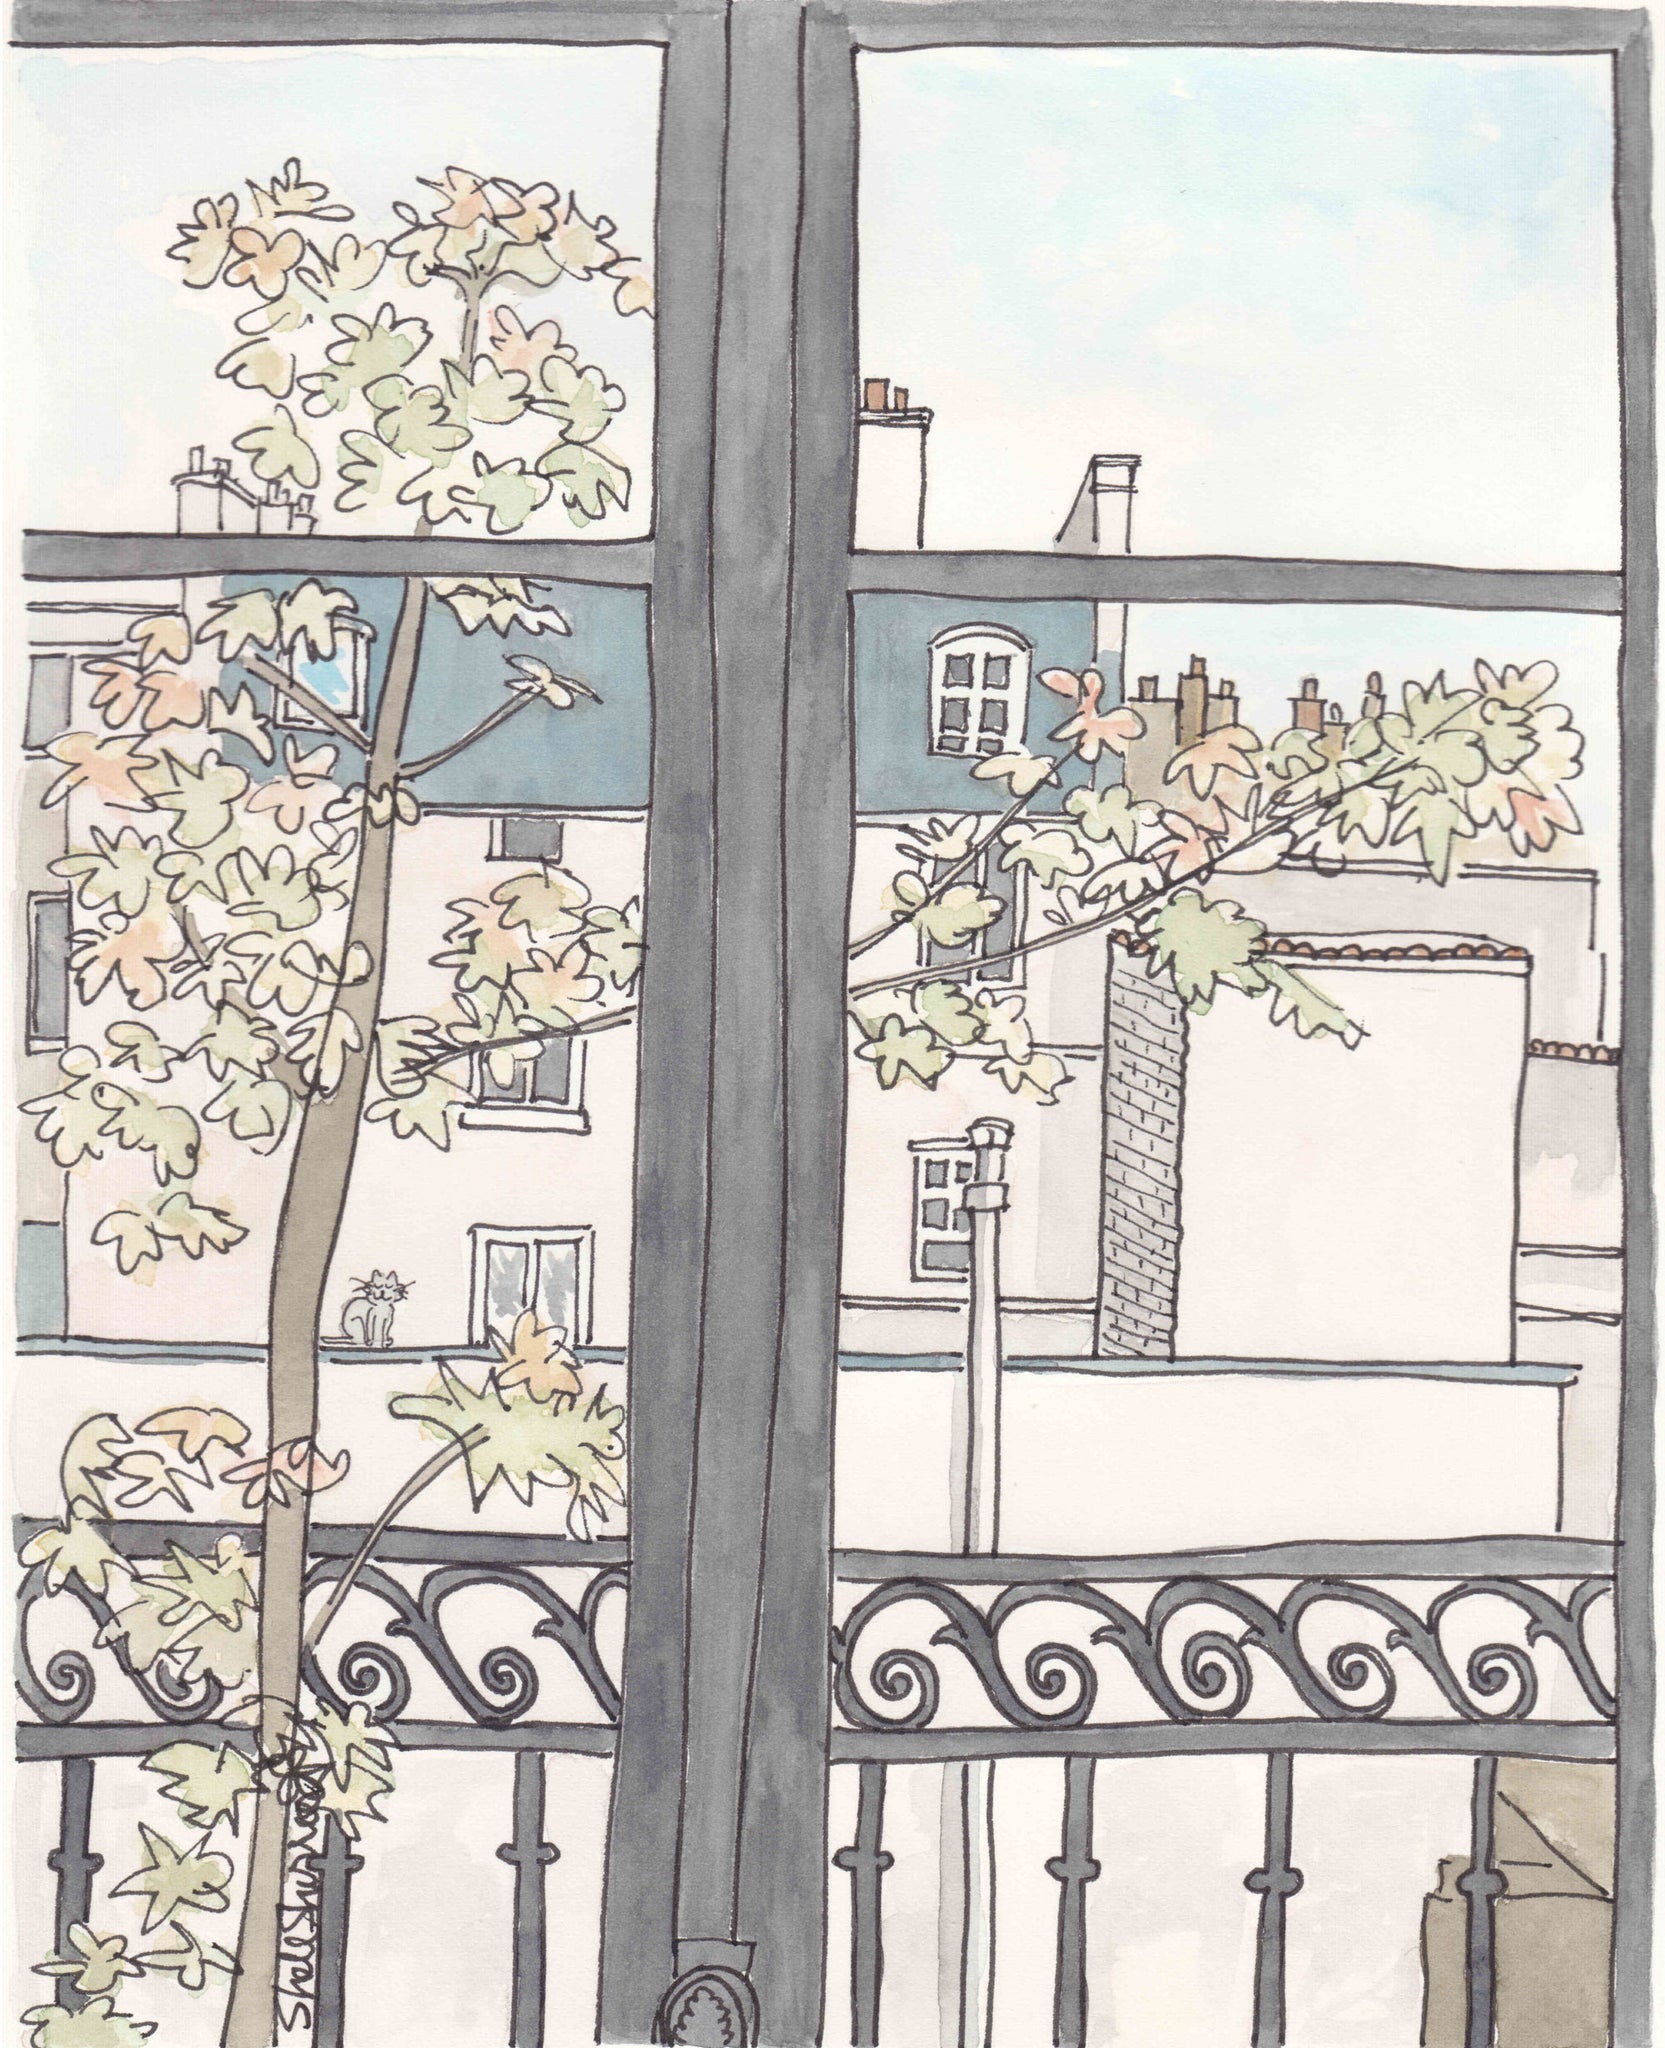 french wall art paris print rooftop autumn view by shell sherree